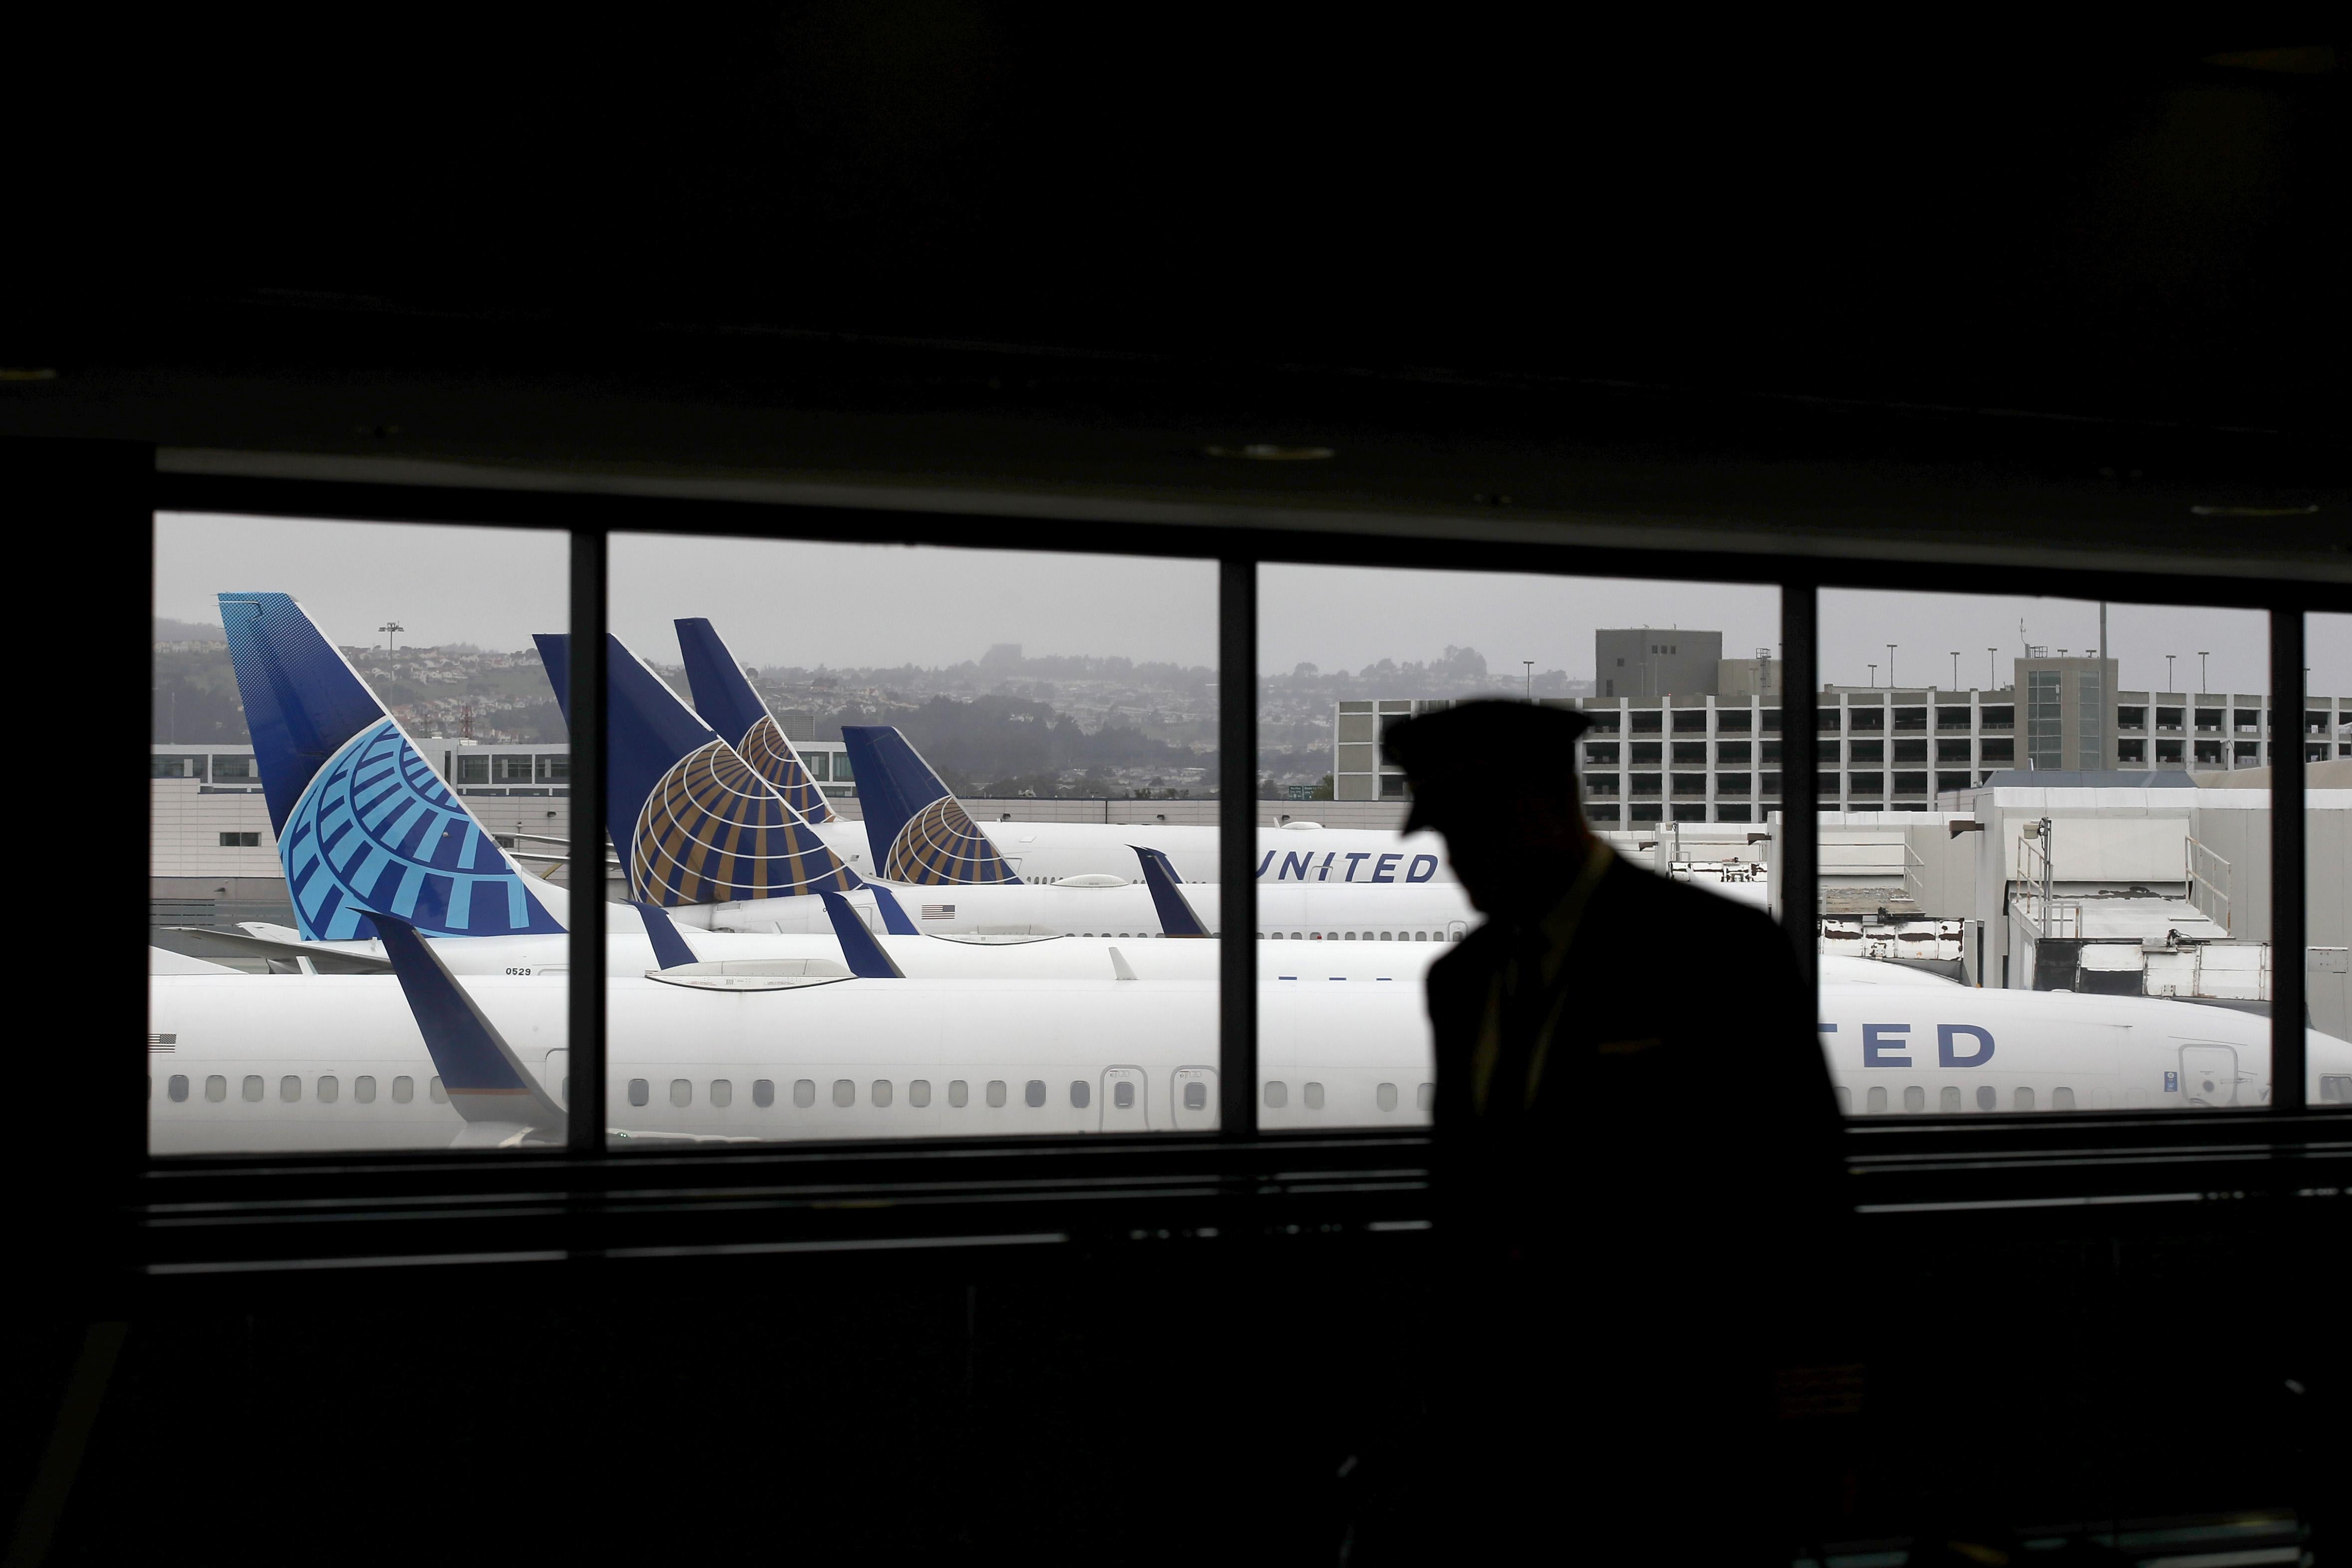 A pilot walks by a window, through which multiple parked United Airlines planes are visible.